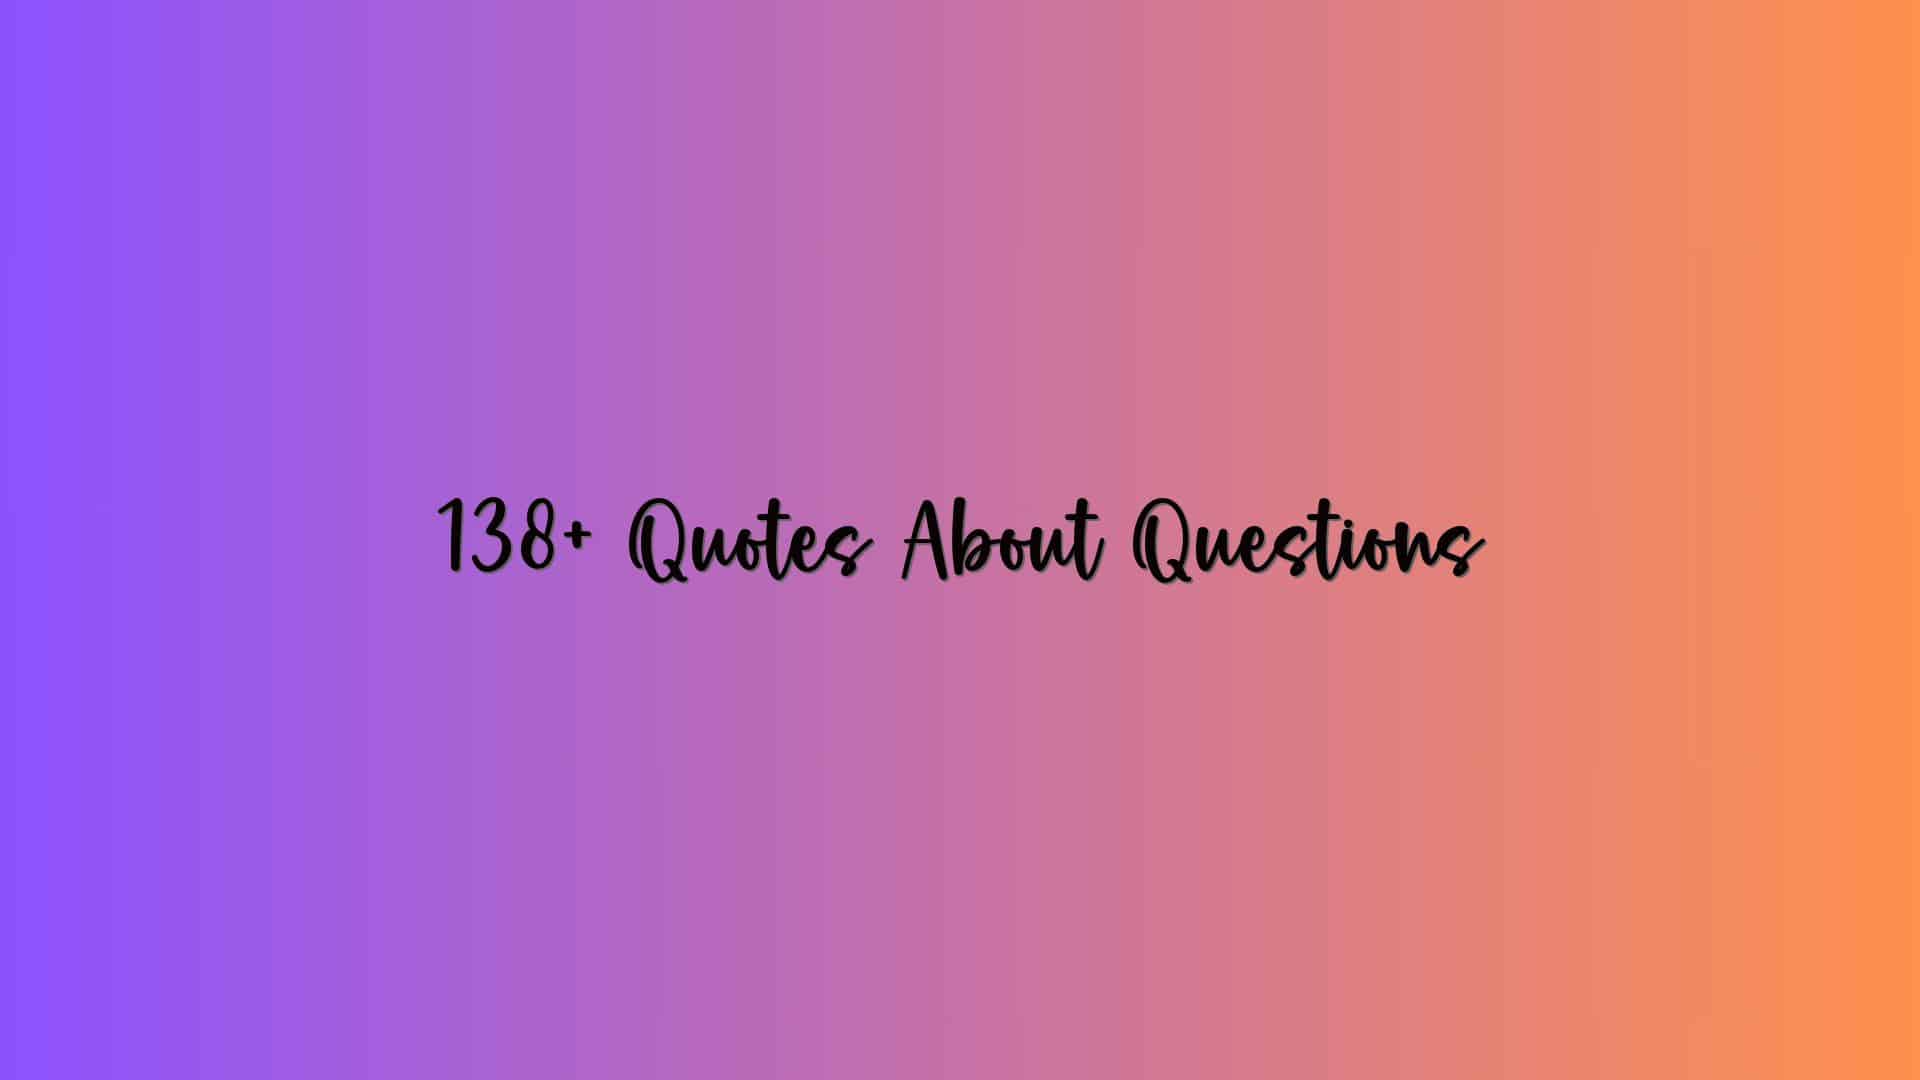 138+ Quotes About Questions